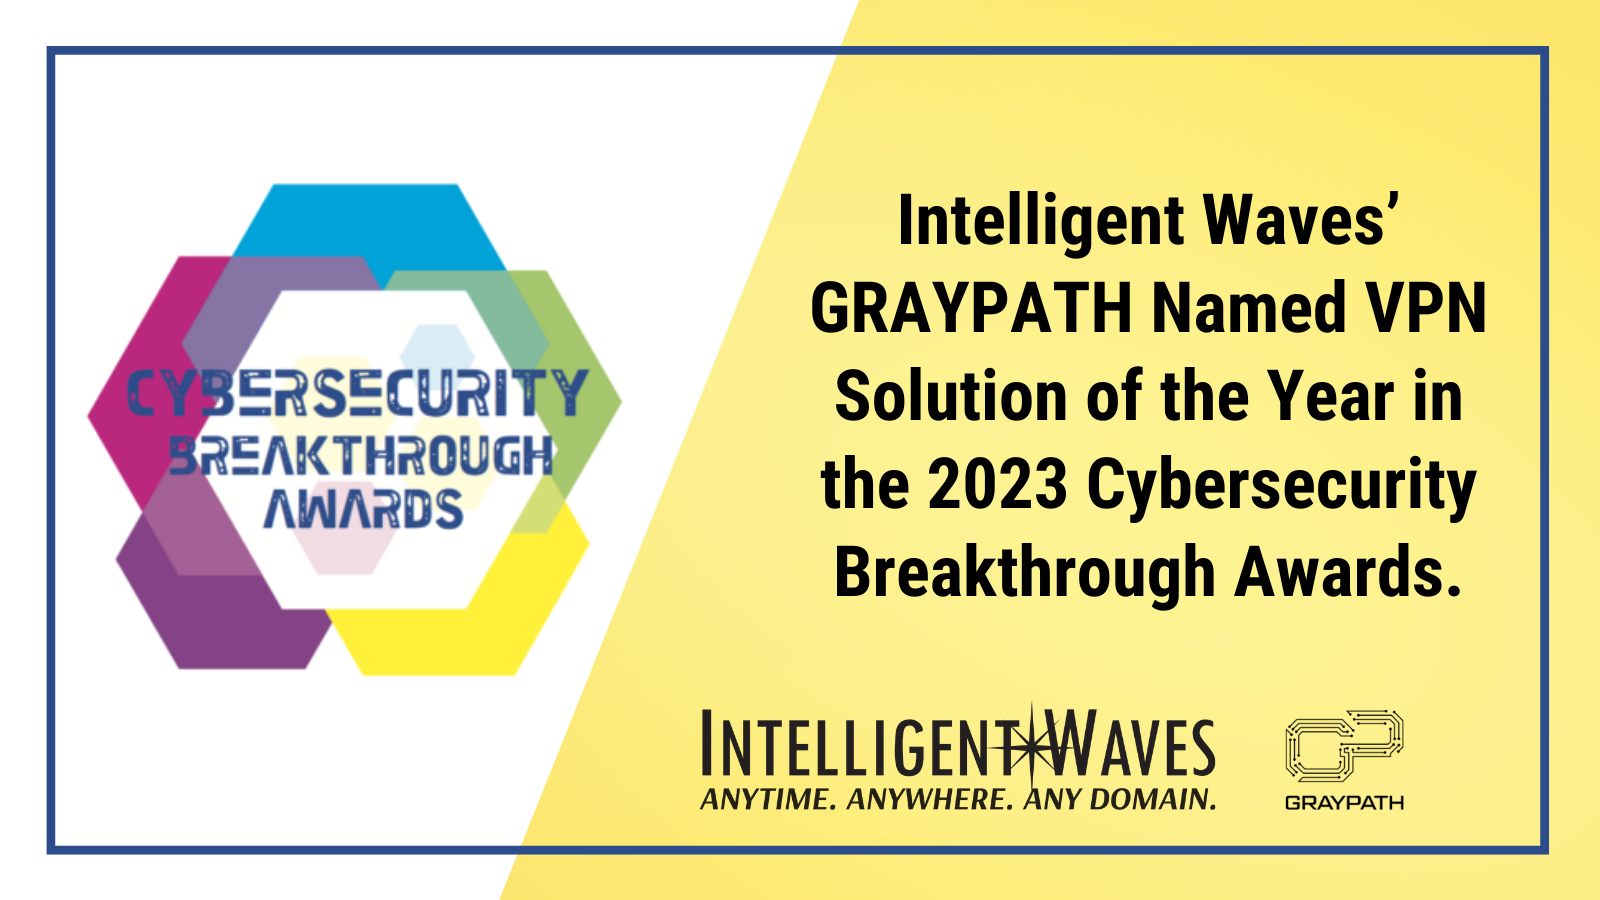 2023 Cybersecurity Breakthrough Awards 2023 Graphic